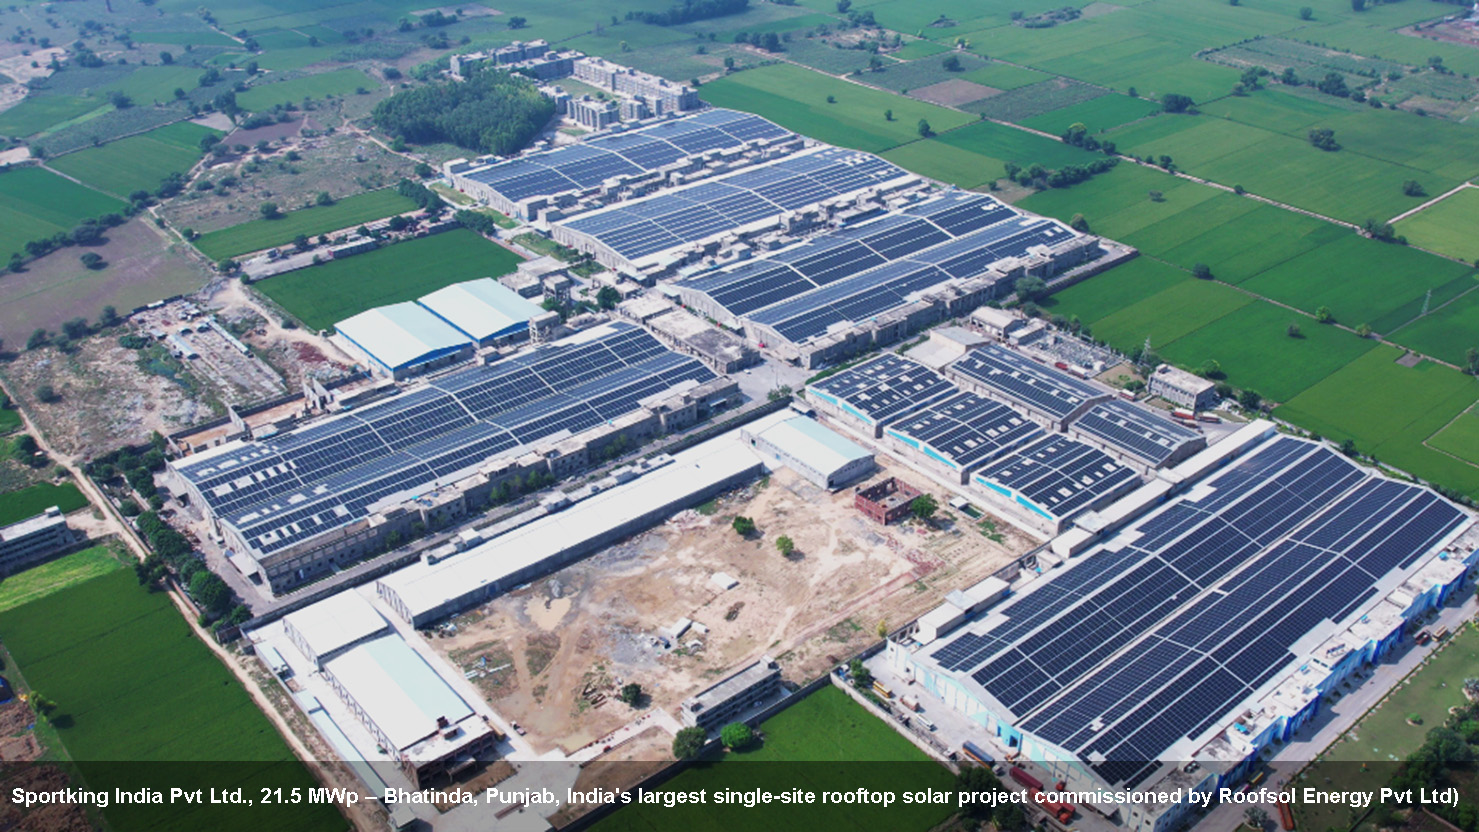 Roofsol Energy Leads the Textile Industry Towards Sustainability Through Solar Solutions